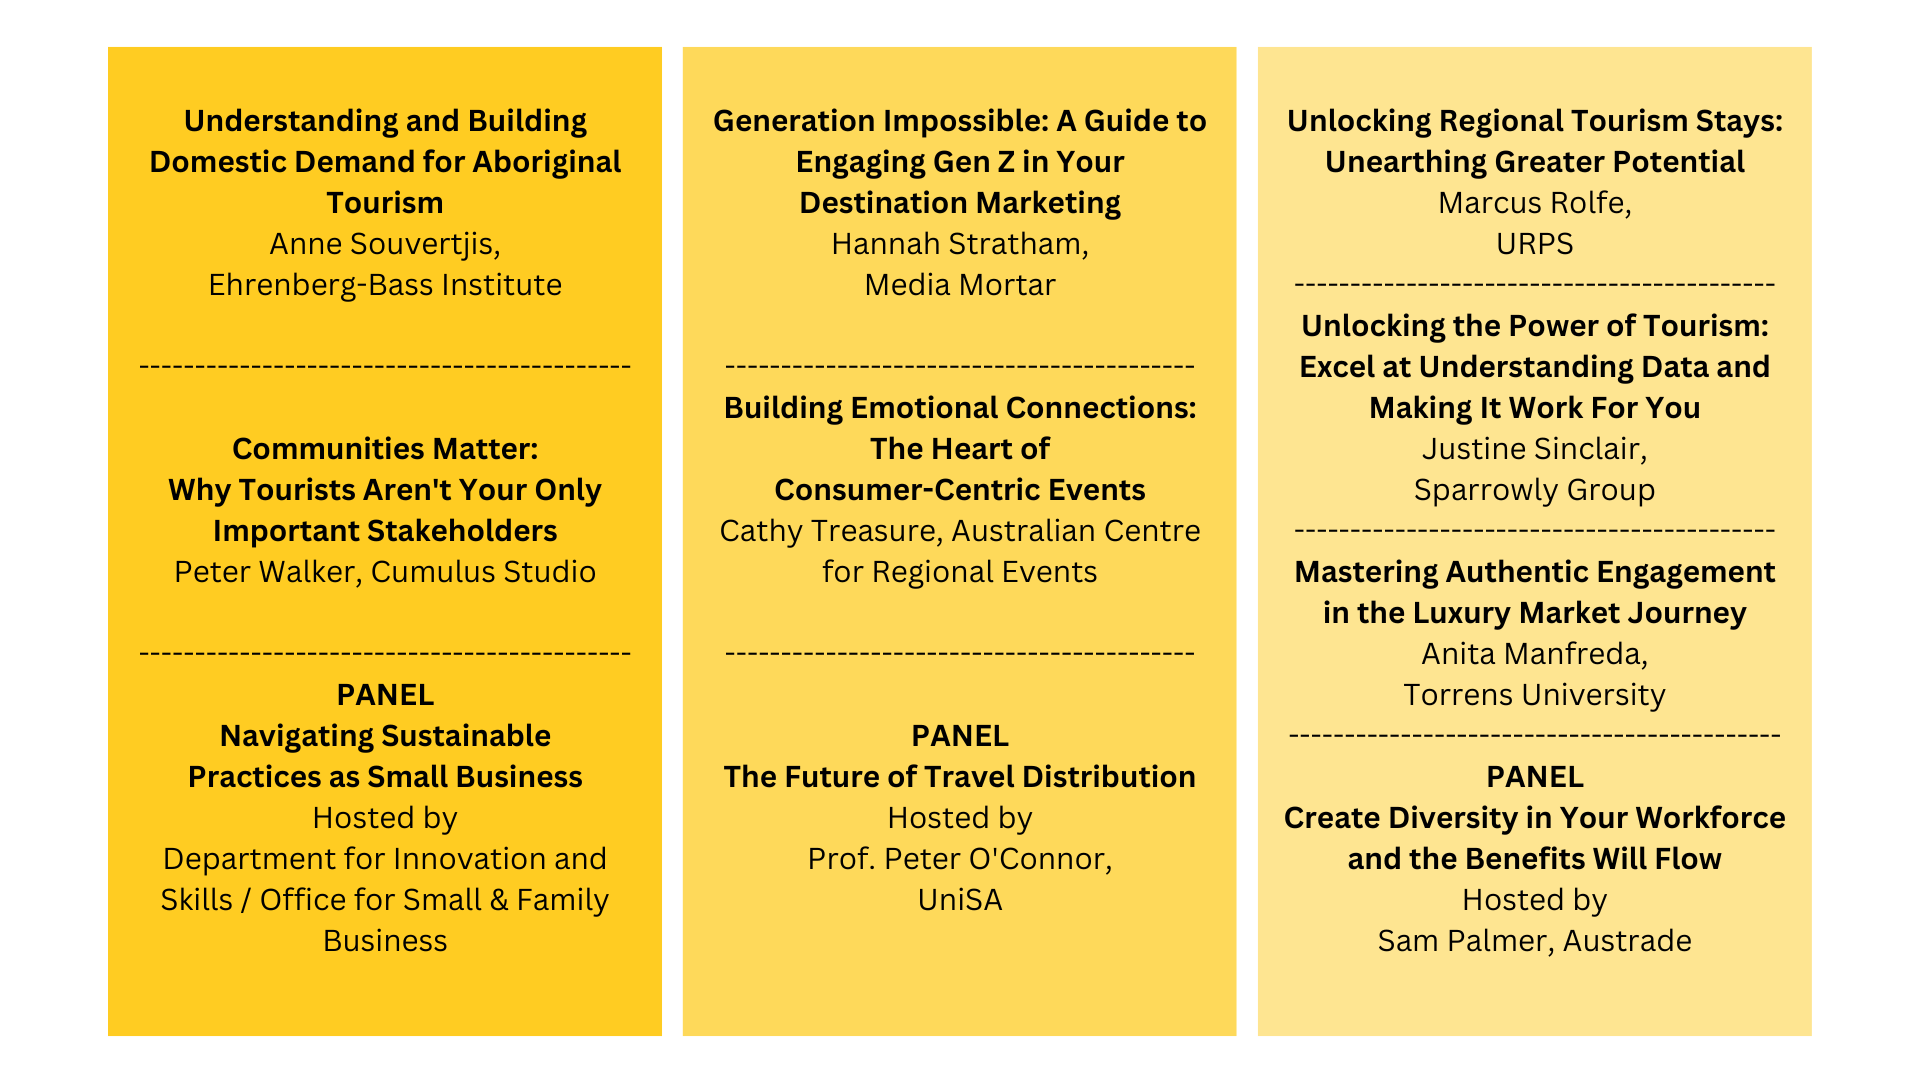 Image displaying a chart with nine yellow blocks, each outlining different topics and speakers related to tourism